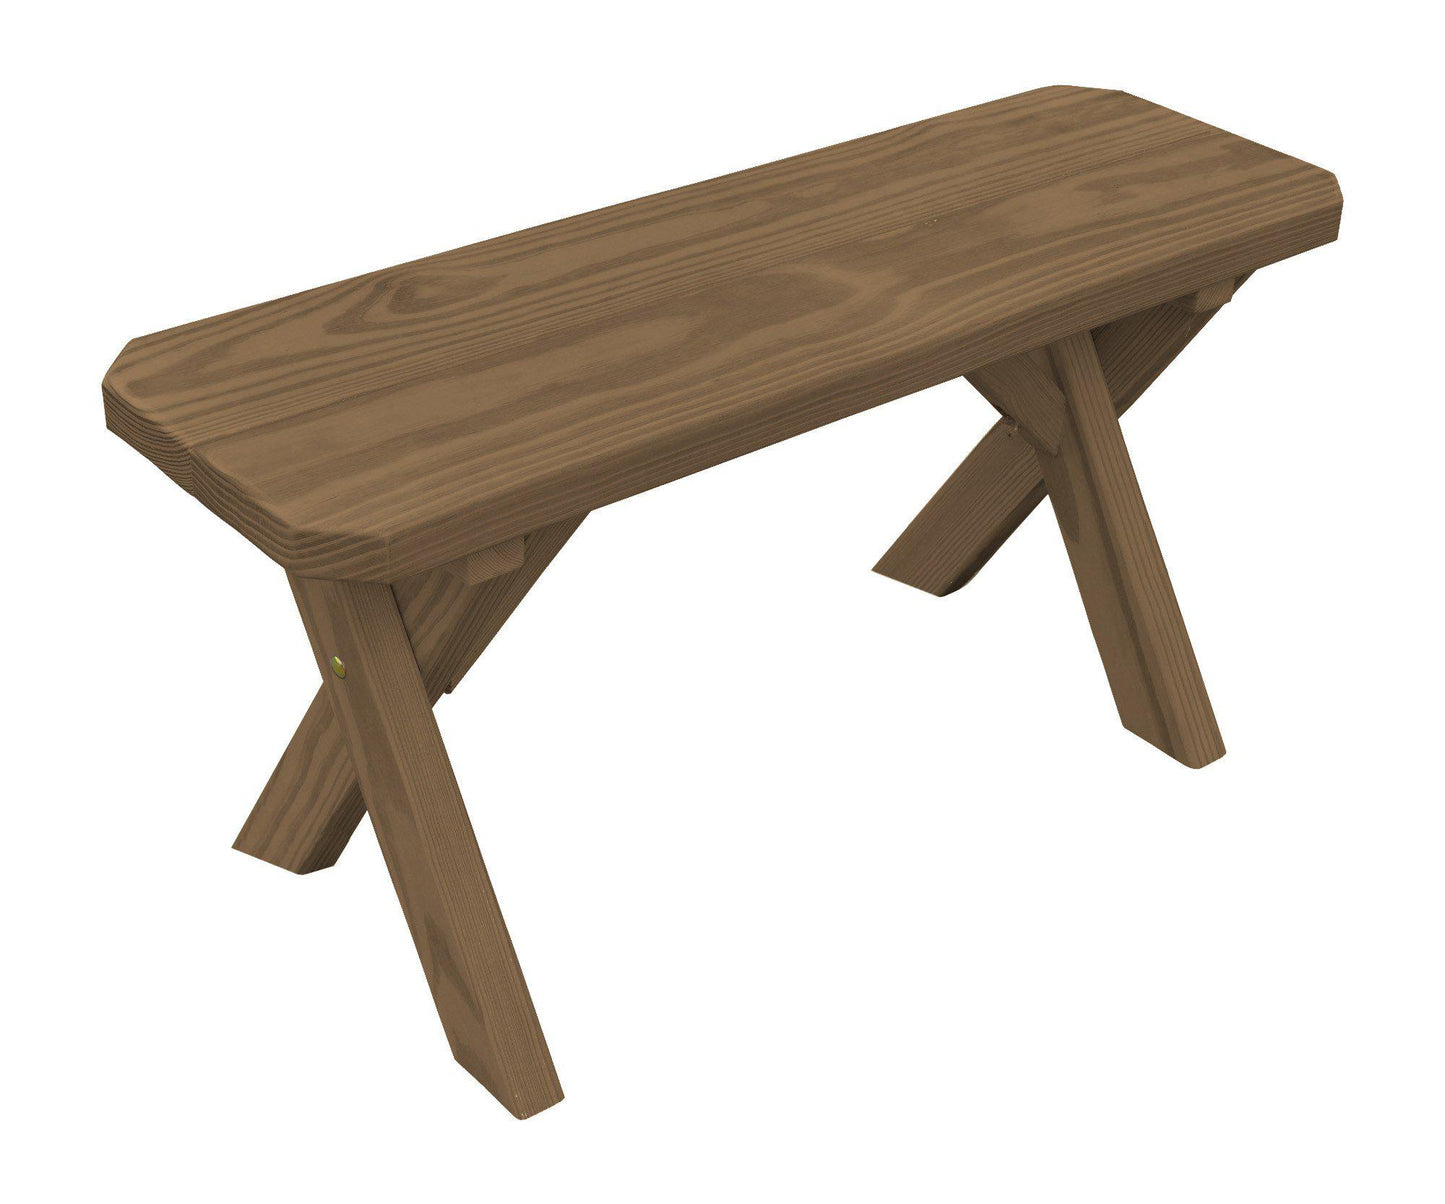 A&L Furniture Co. Pressure Treated Pine 33" Crossleg Bench Only - LEAD TIME TO SHIP 10 BUSINESS DAYS